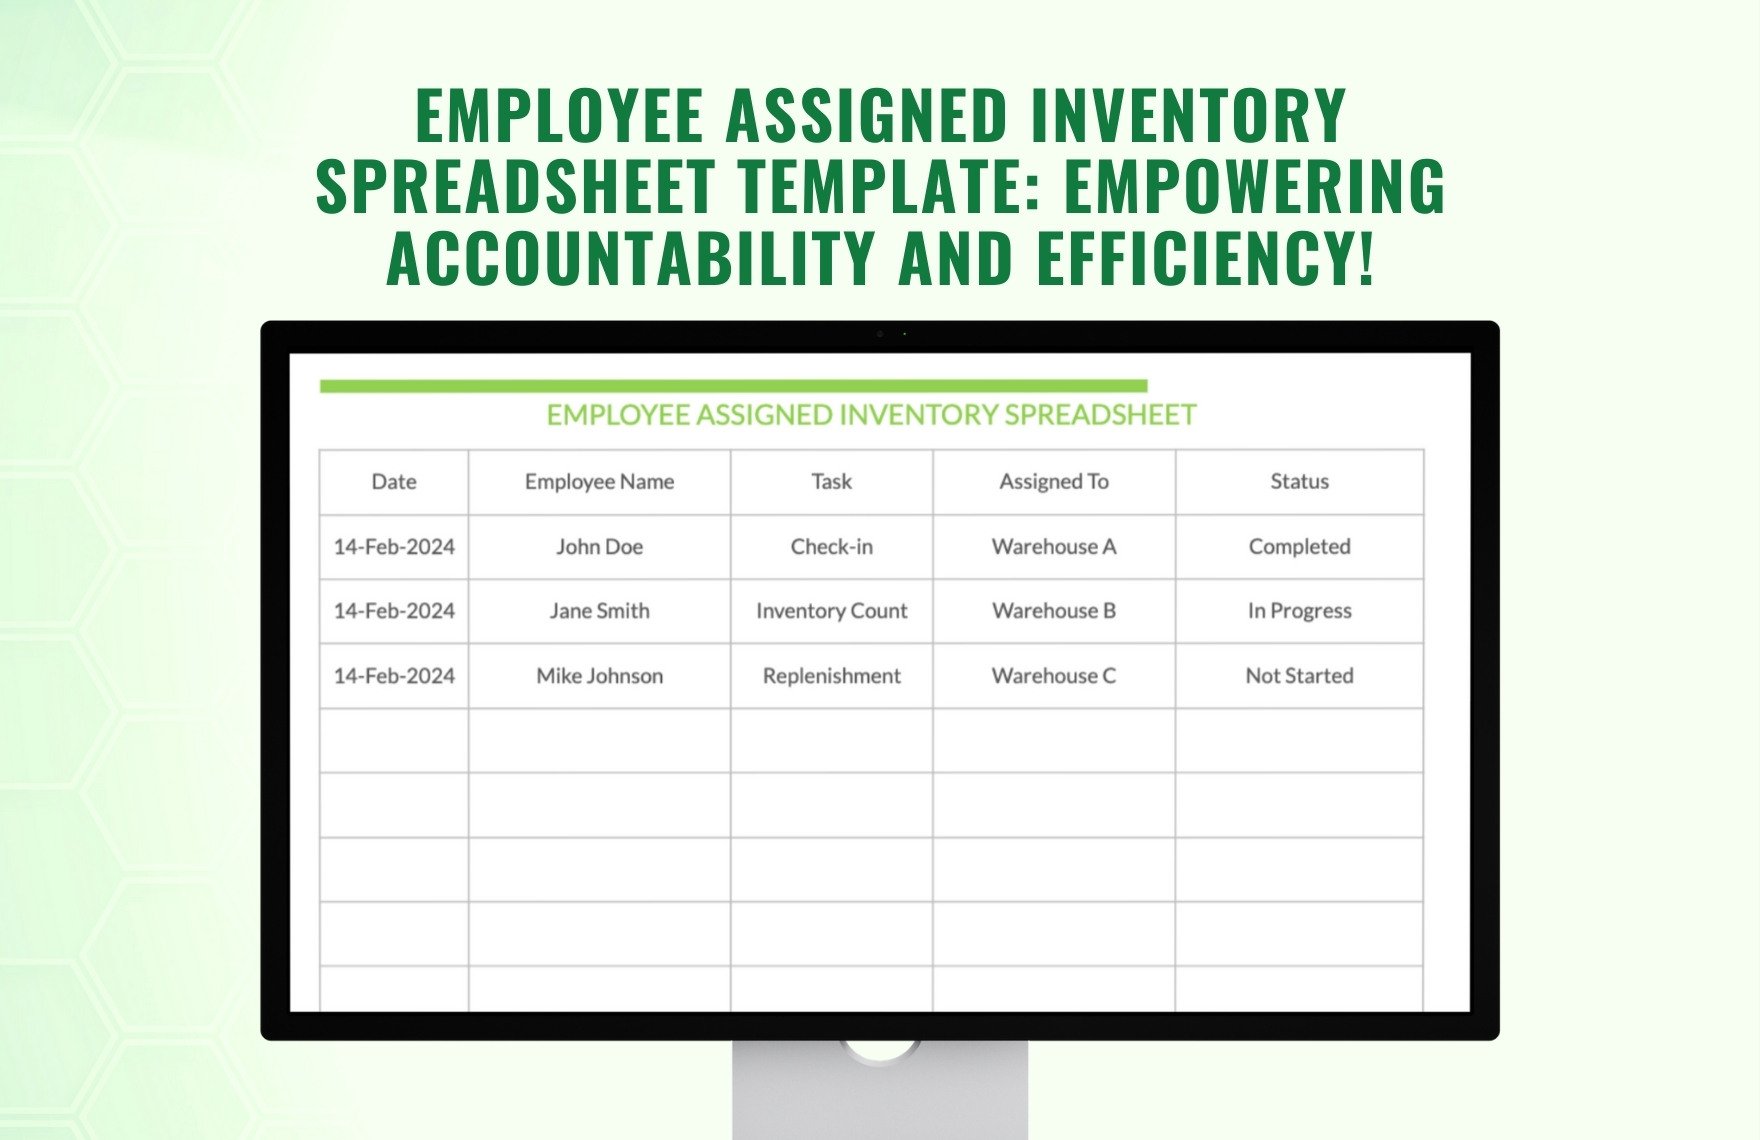 Employee Assigned Inventory Spreadsheet Template